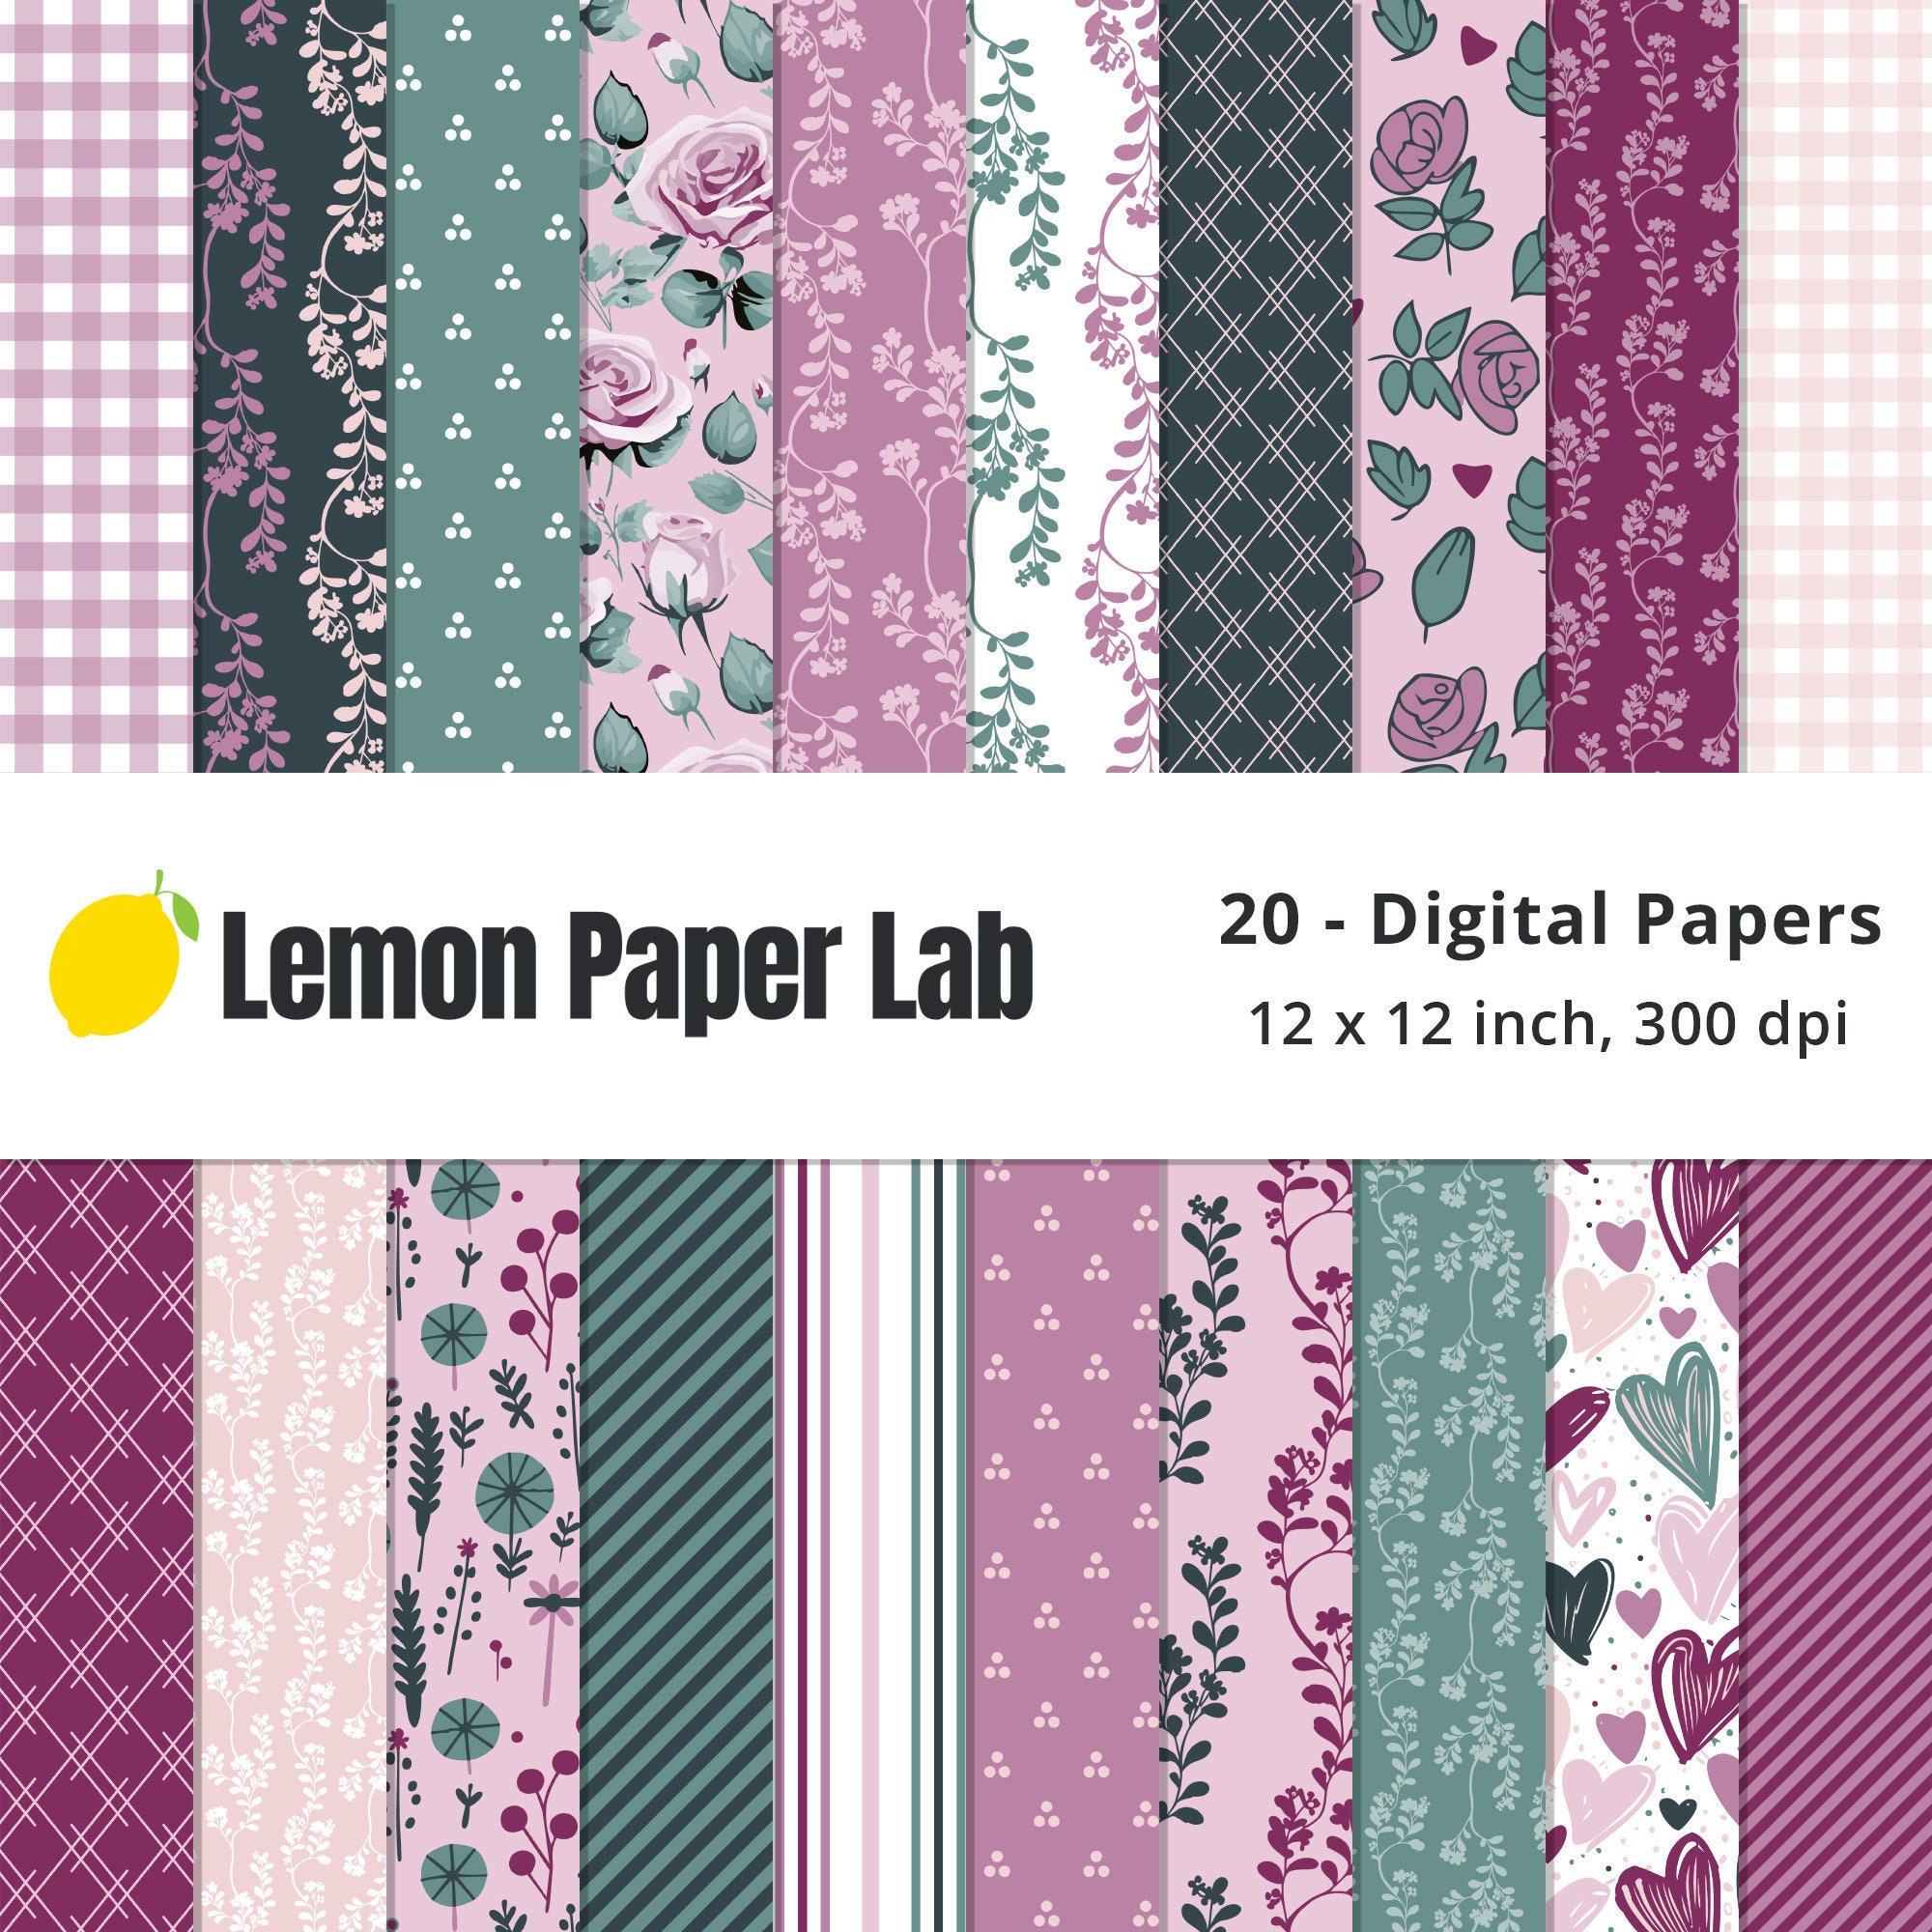 Light Pink and Black Scrapbook Papers Graphic by Lemon Paper Lab · Creative  Fabrica